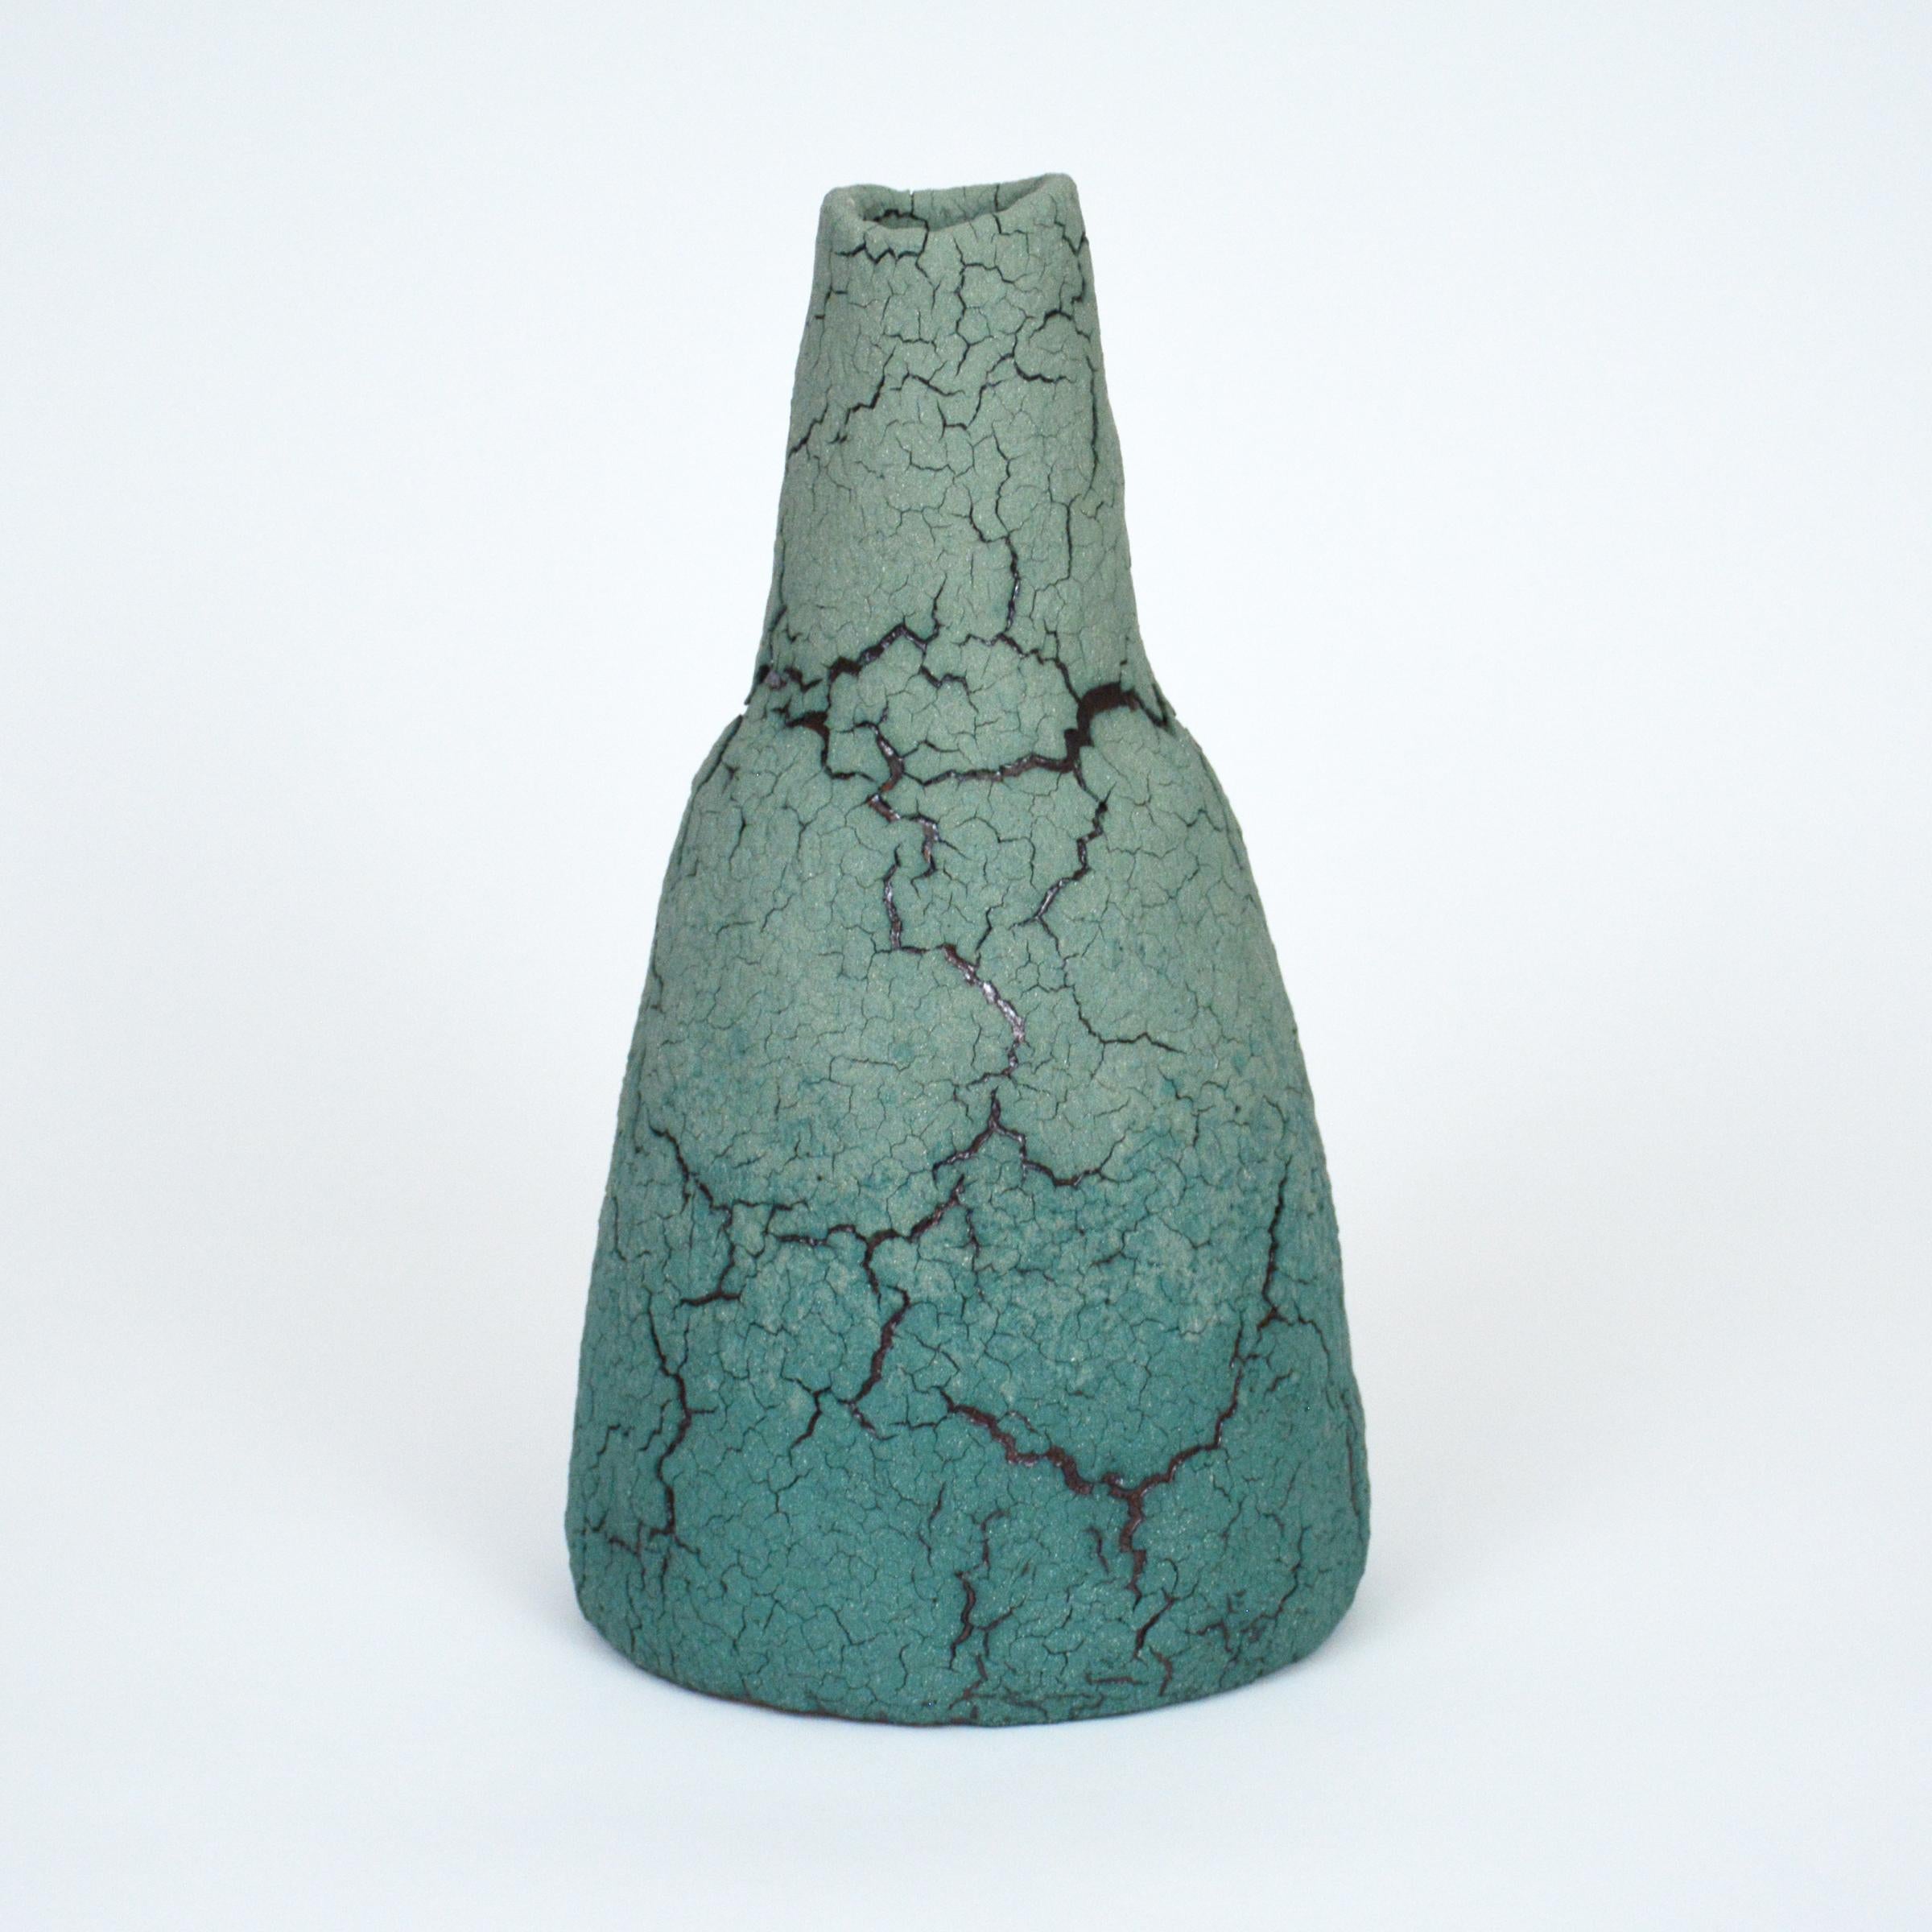 Ceramic bottle by William Edwards
Hand built earthenware vessel, fired multiple times to achieve a textured surface of random abstraction, ice blue - turquoise matte with dark brown gloss glaze breaking through.

William received his BFA in